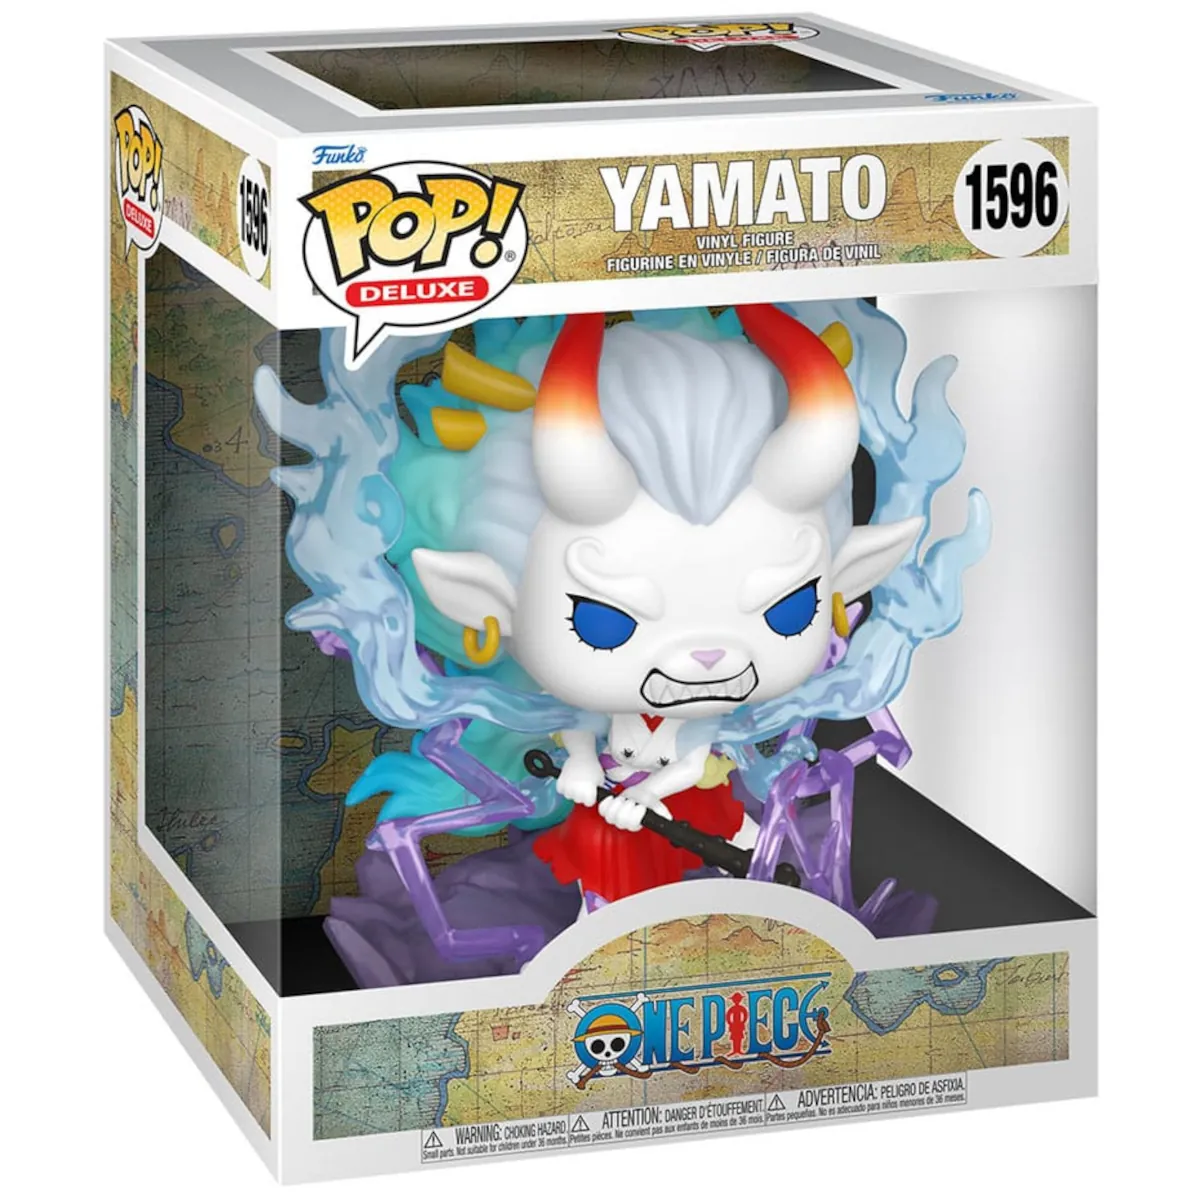 FK75581 Funko Pop! Deluxe - One Piece - Yamato (Man-Beast Form) Collectable Vinyl Figure Box Front